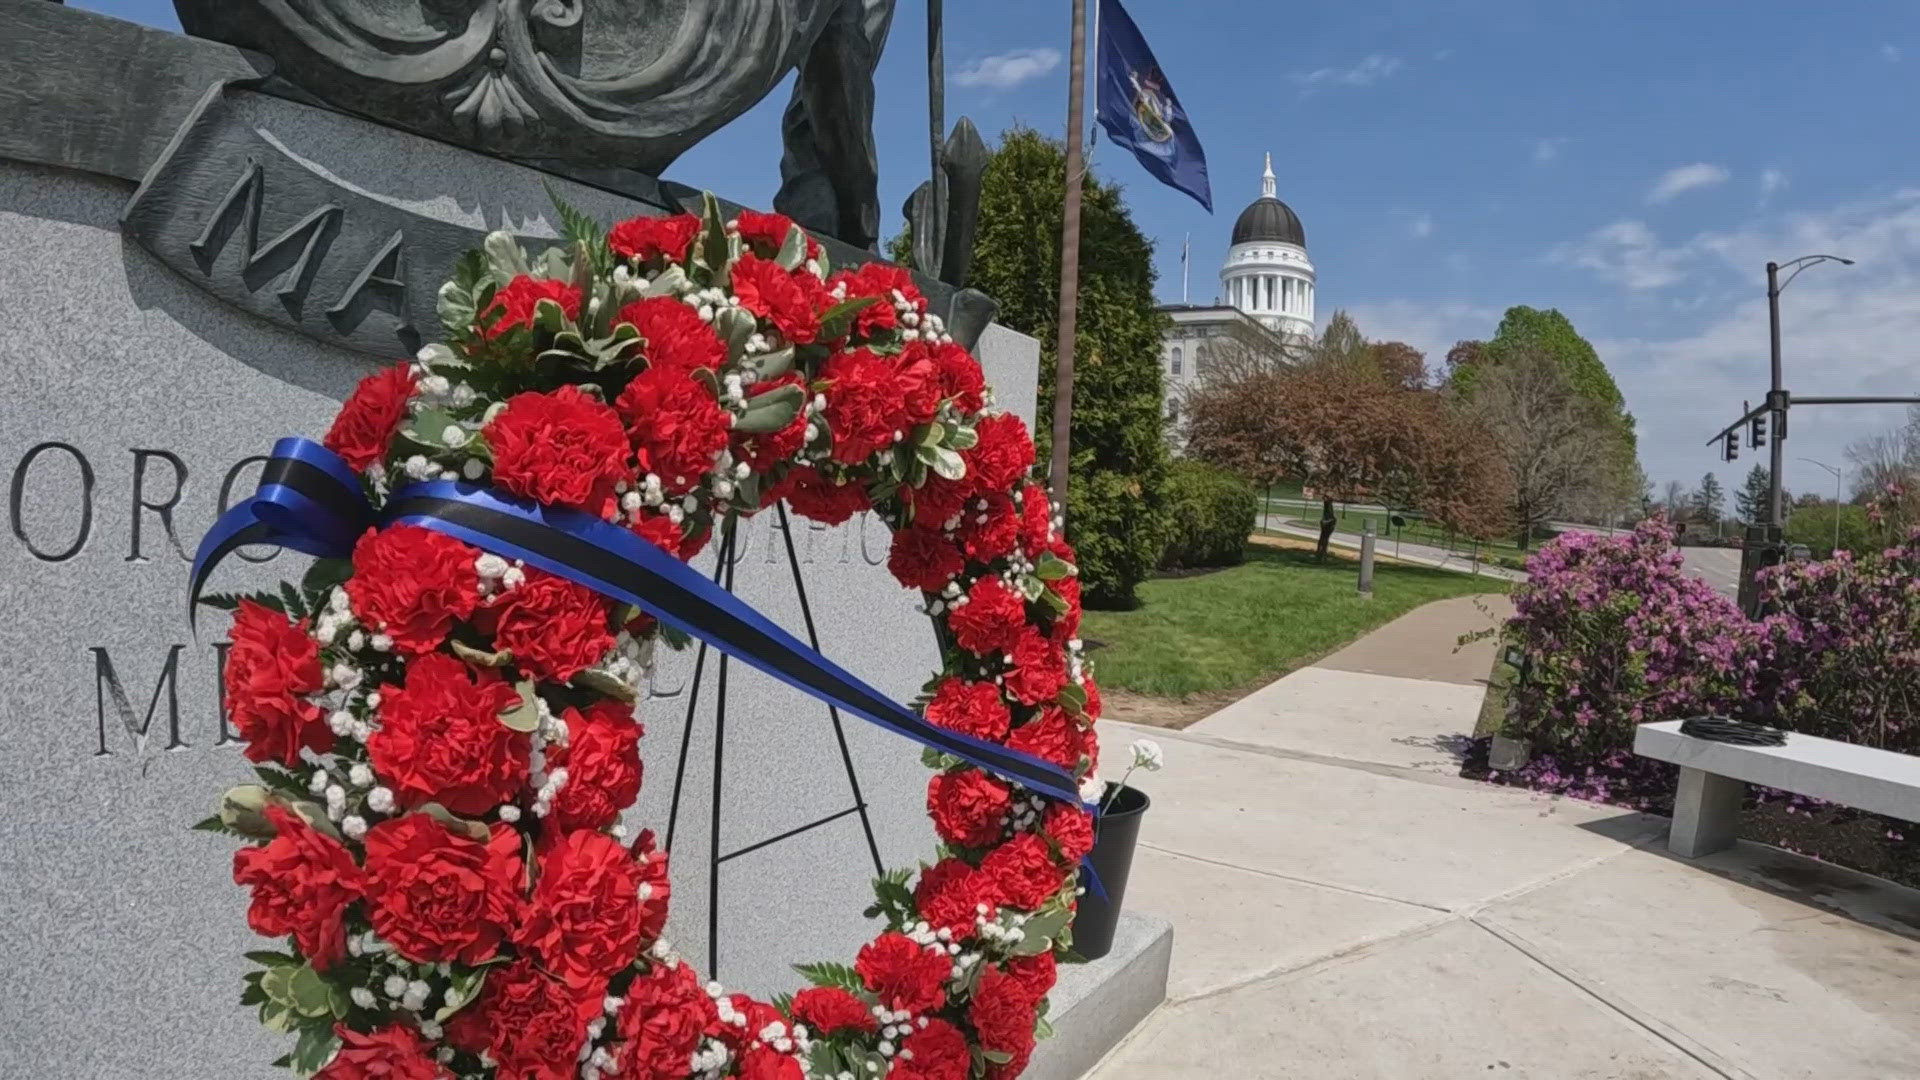 The memorial ceremony is part of National Police Week, and recognizes 88 Maine officers killed in the line of duty throughout the state's history.